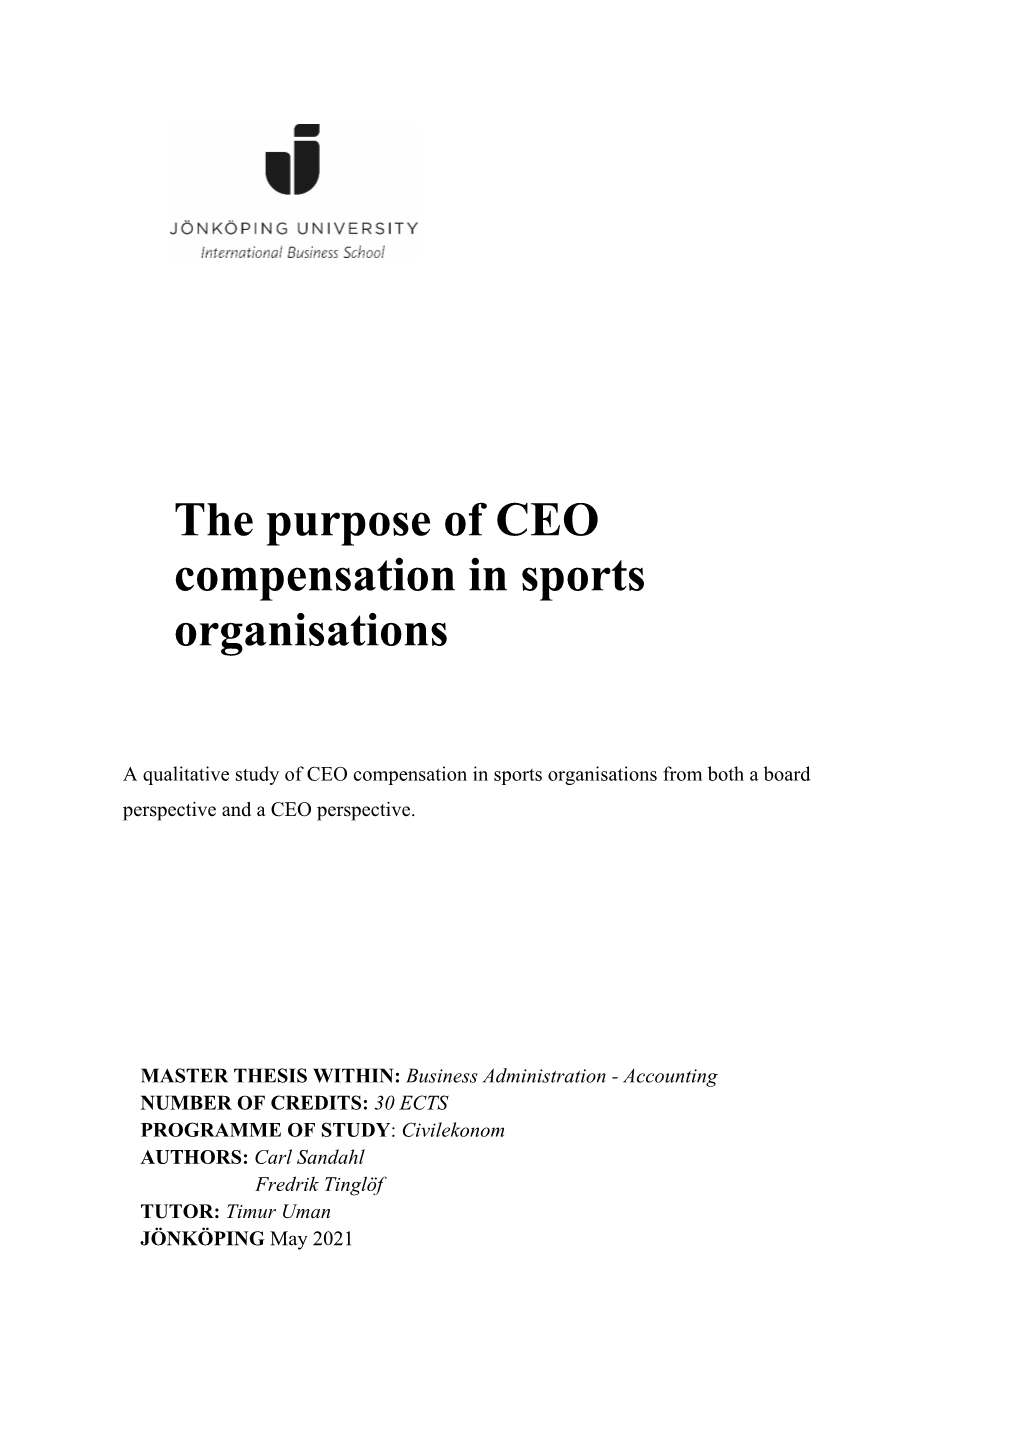 The Purpose of CEO Compensation in Sports Organisations